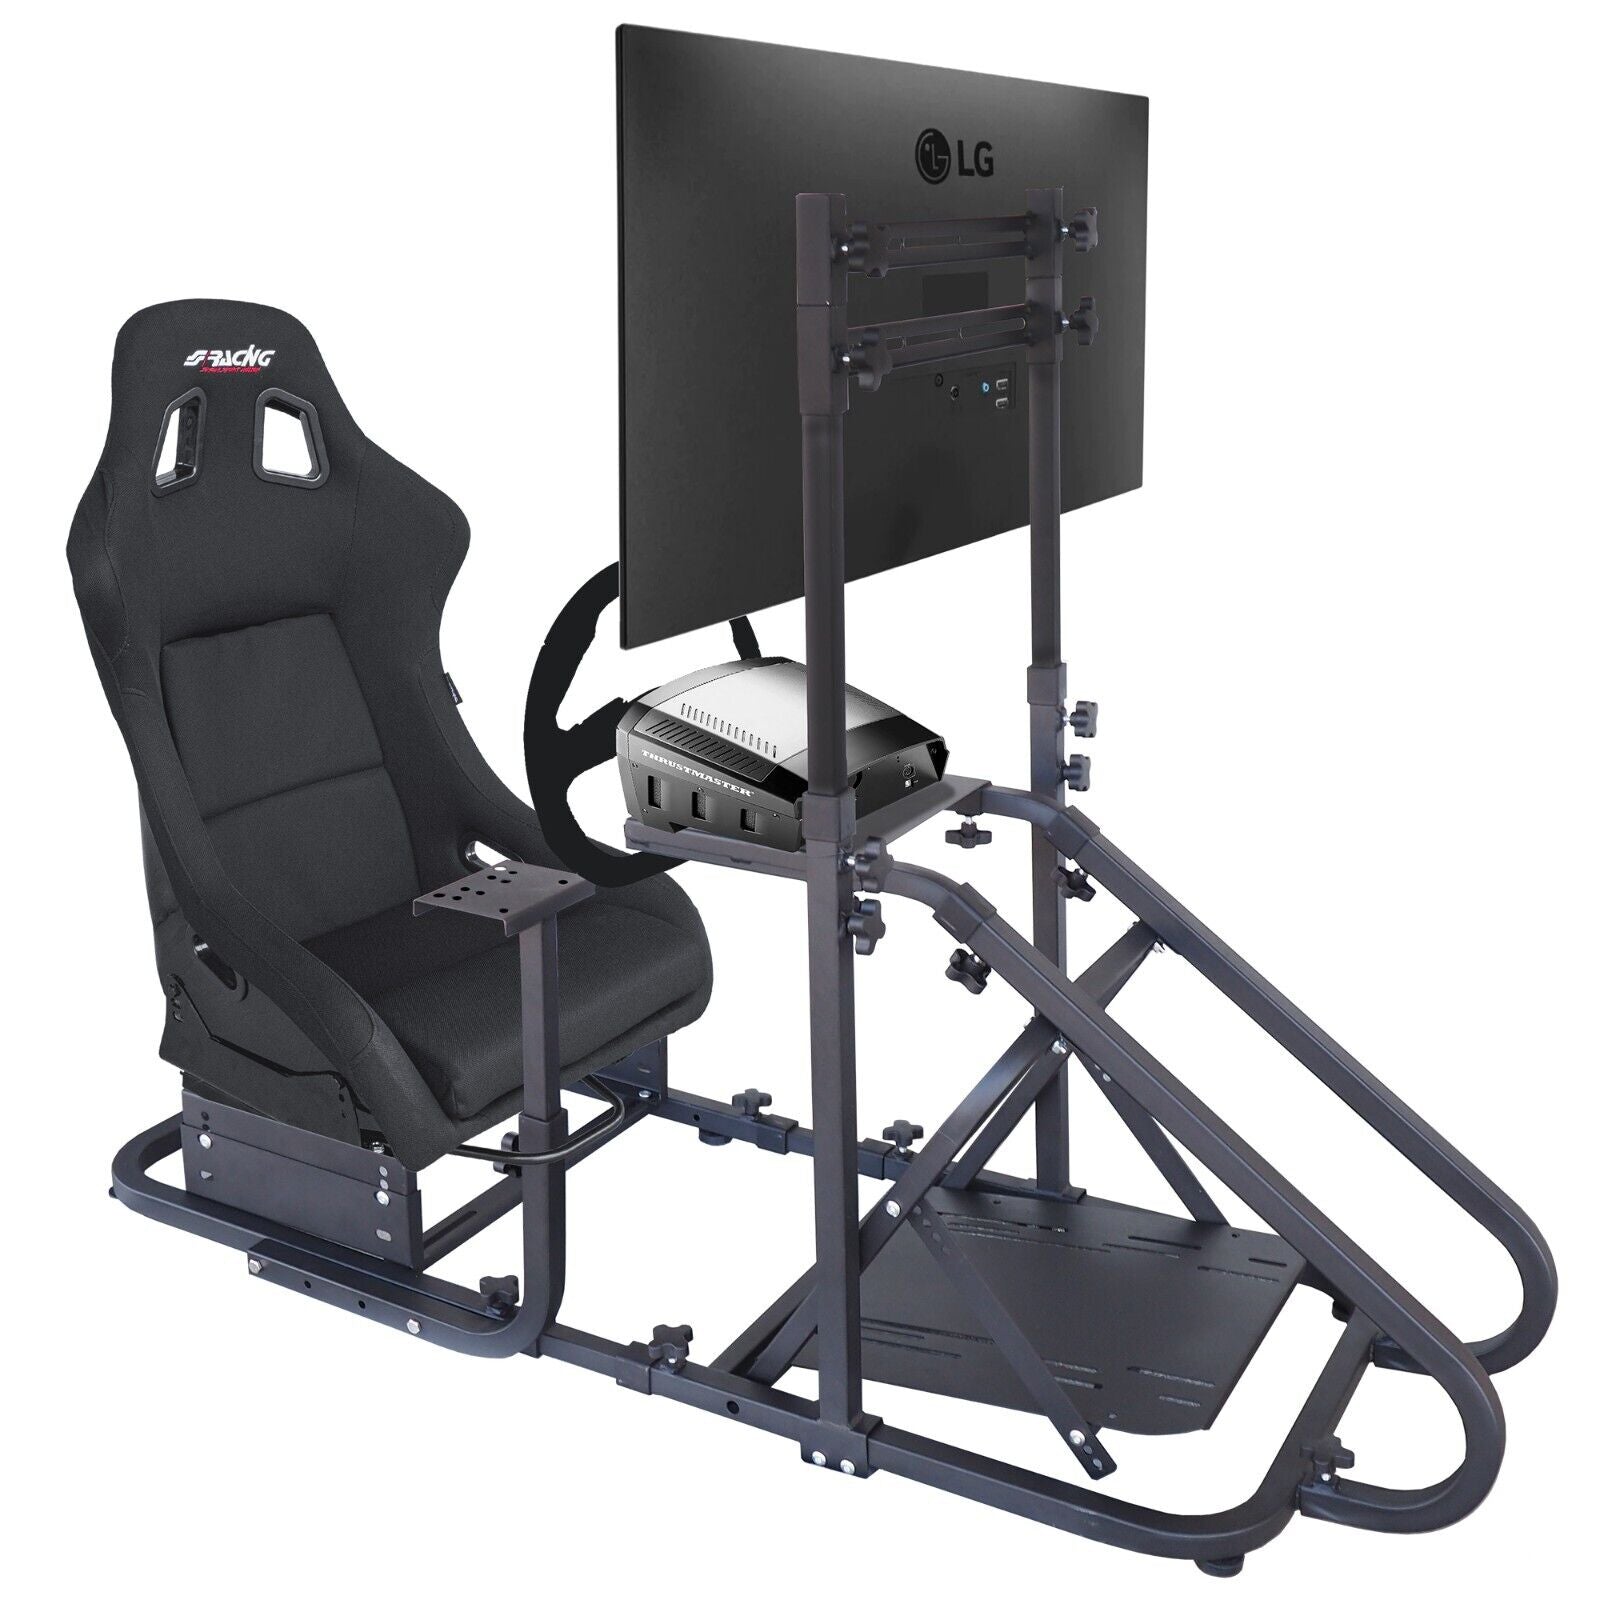 Luxe Driving Game Sim Racing Frame Rig for Screen Seat Wheel Pedals Xbox PS PC